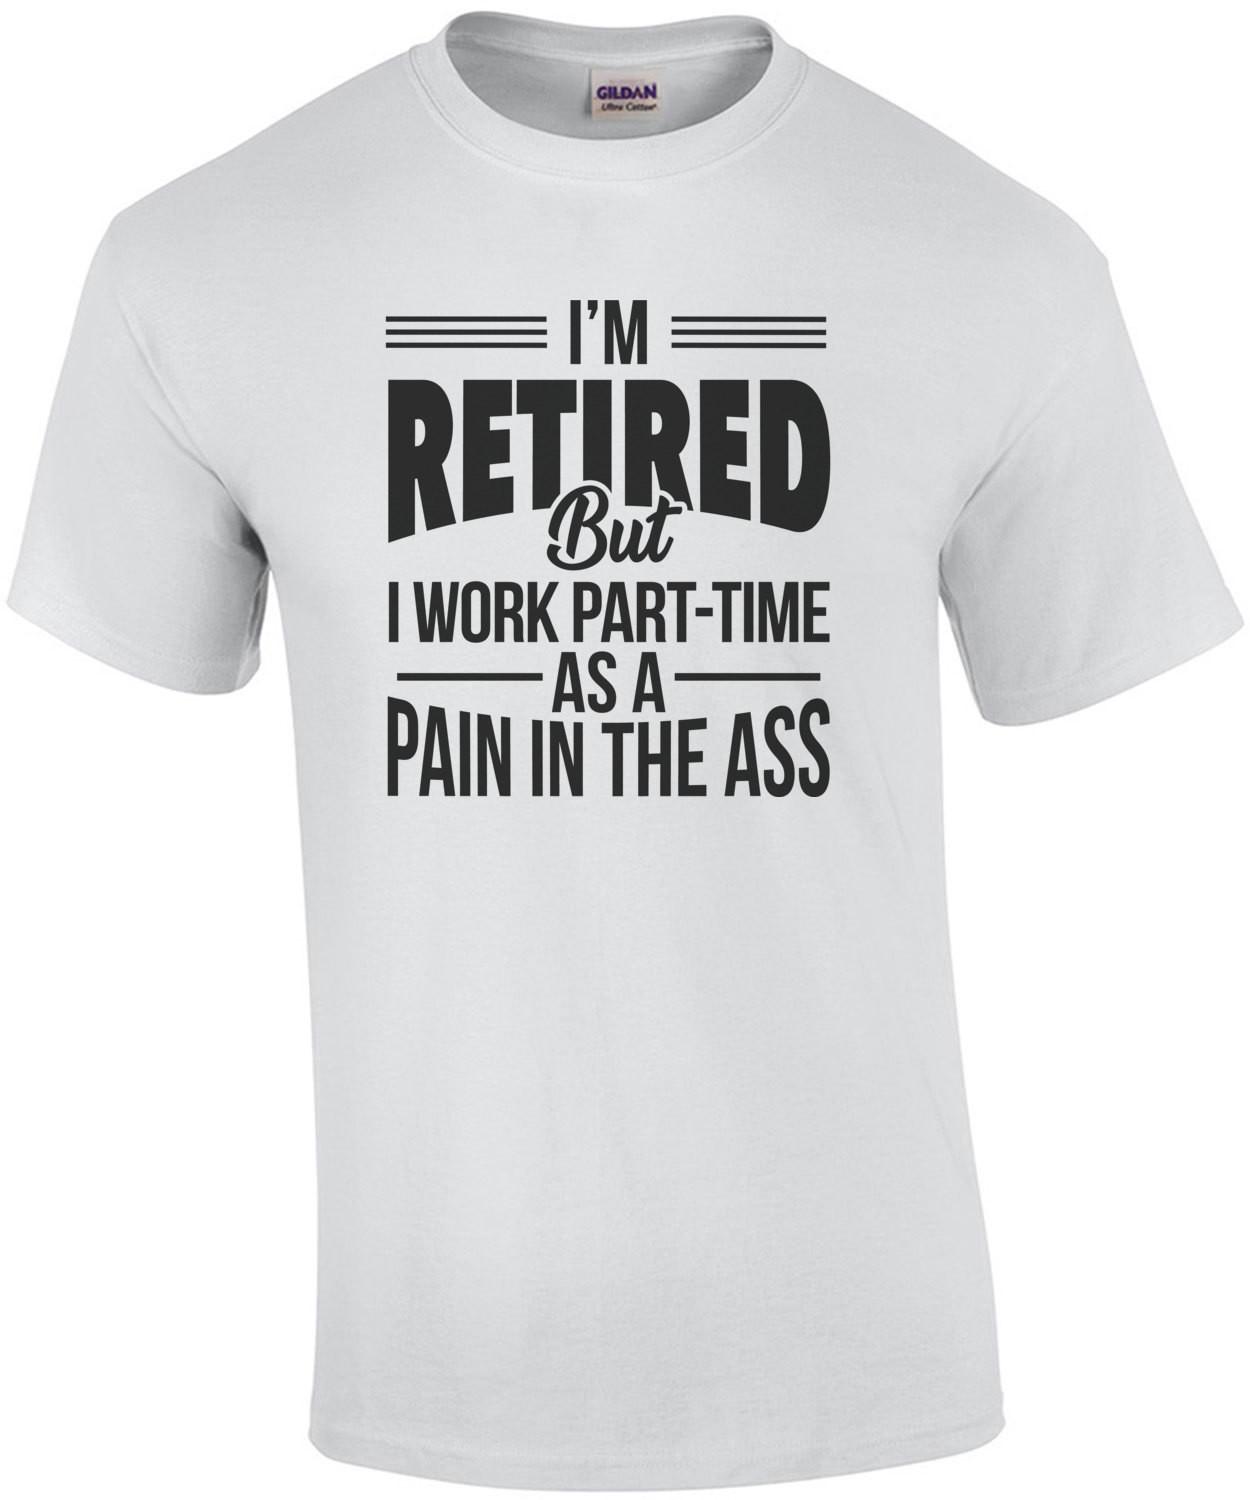 I'm retired but I work part-time as a pain in the ass - retirement t-shirt